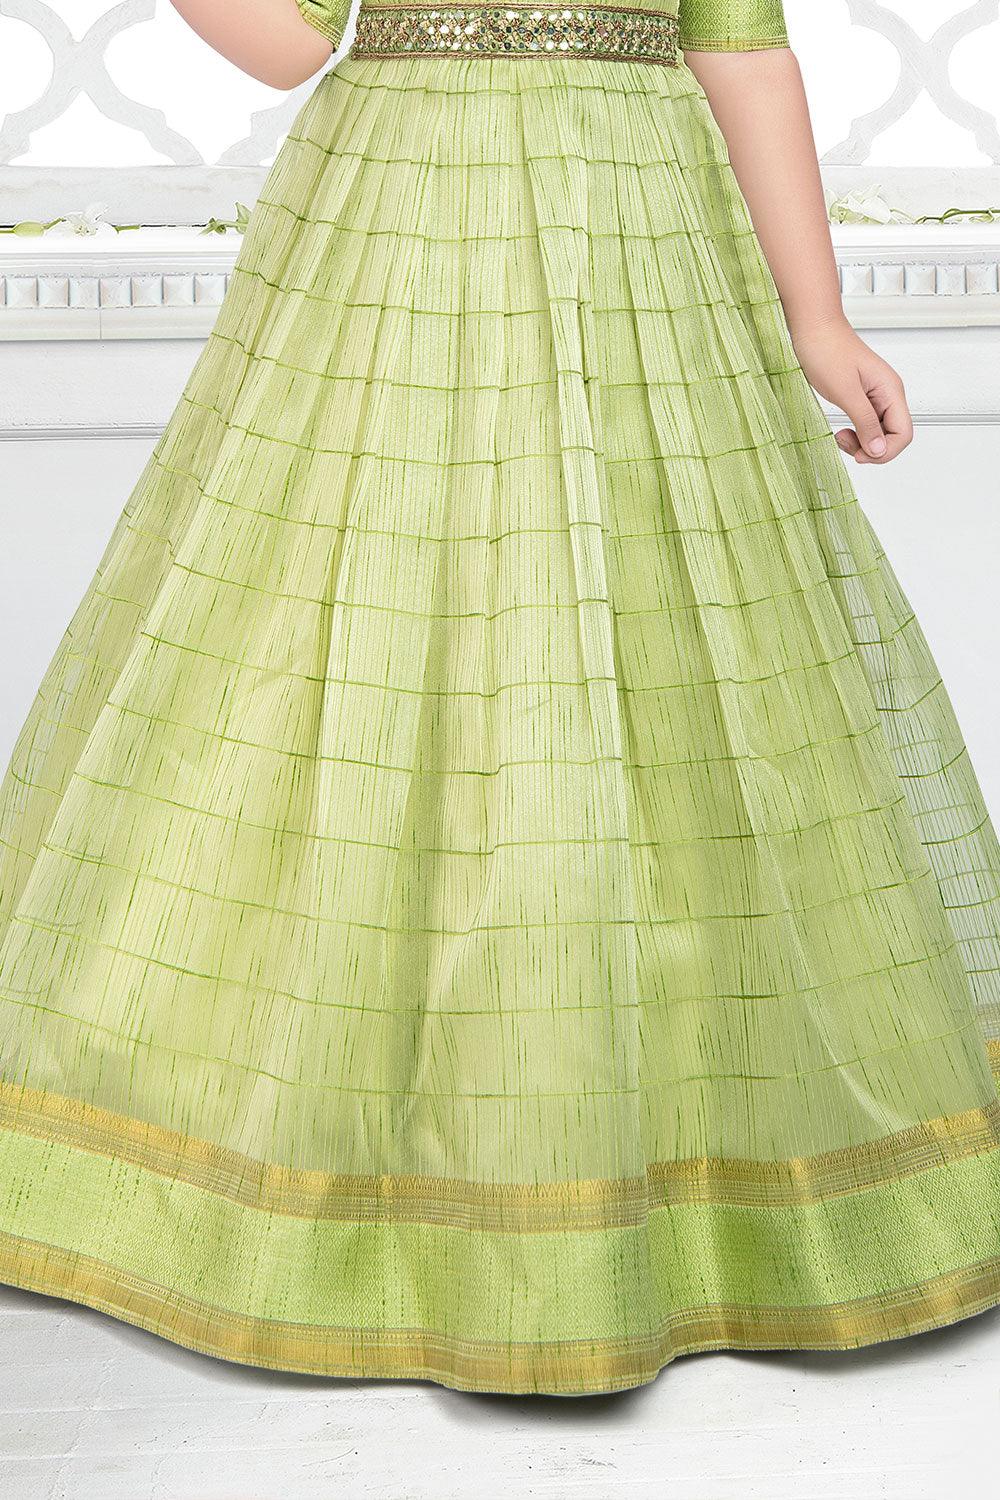 Full Length Green Gown with Puffed Sleeves | Trending Ethnic Wear for Girls